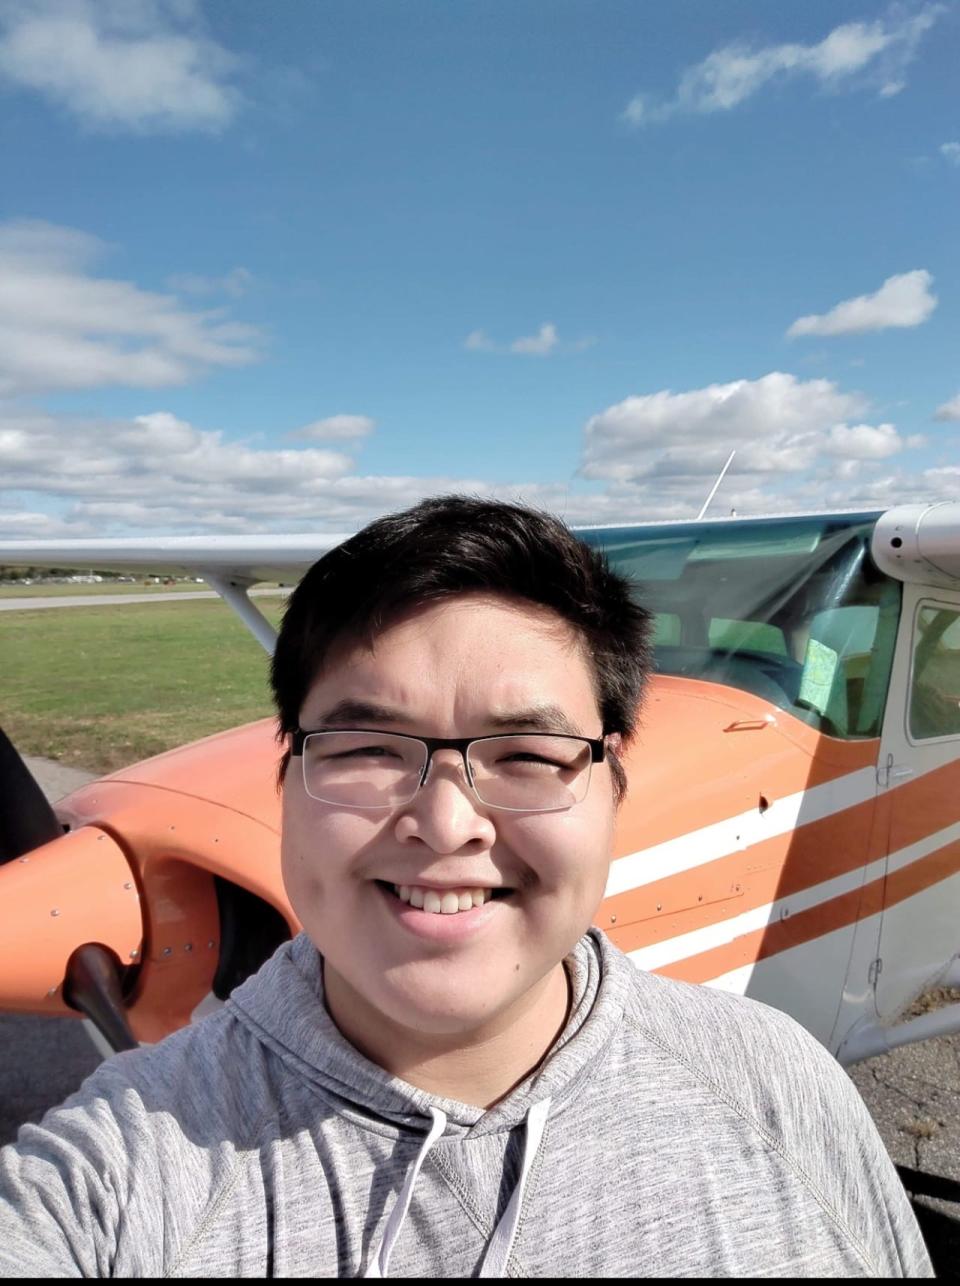 Joseph Akulukjuk, 24, of Pangnirtun, Nunavut, has been hired as a pilot by Canadian North to fly planes in Nunavut.